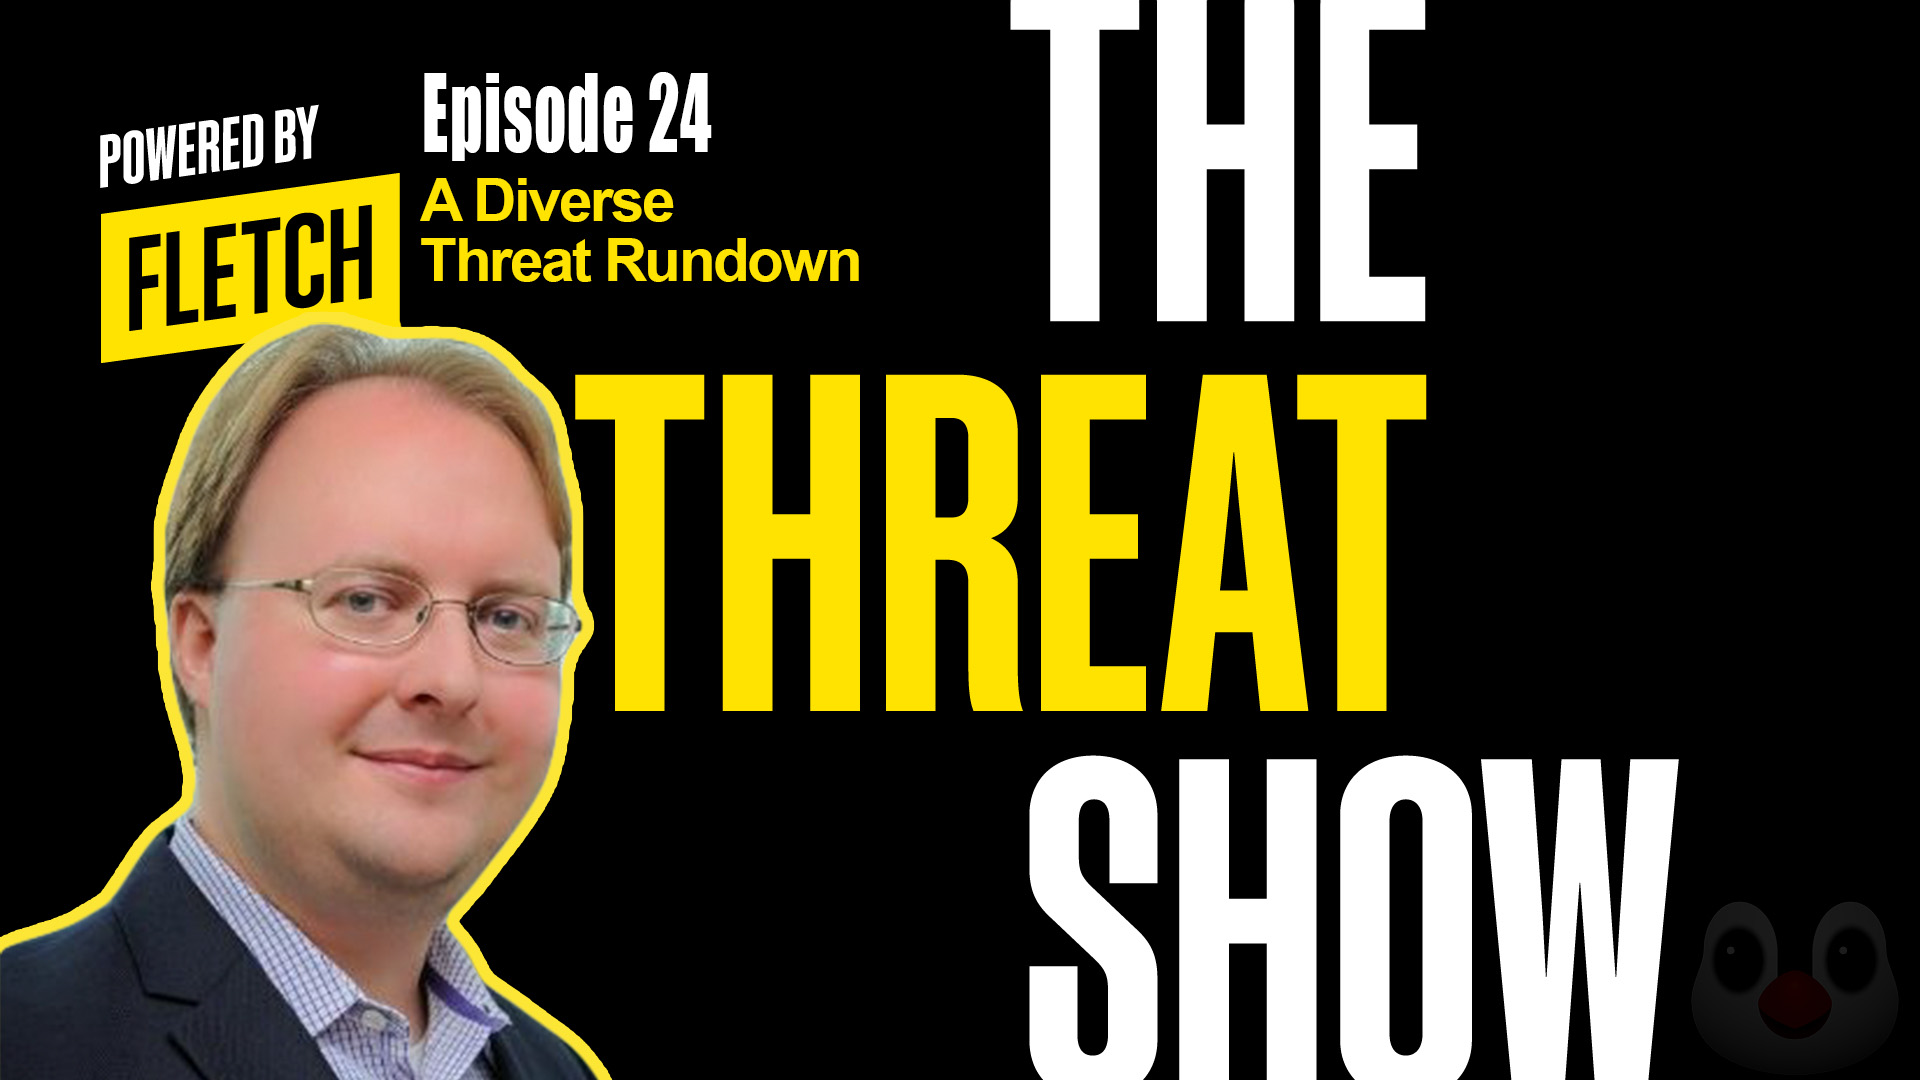 The Threat Show Ep. 24